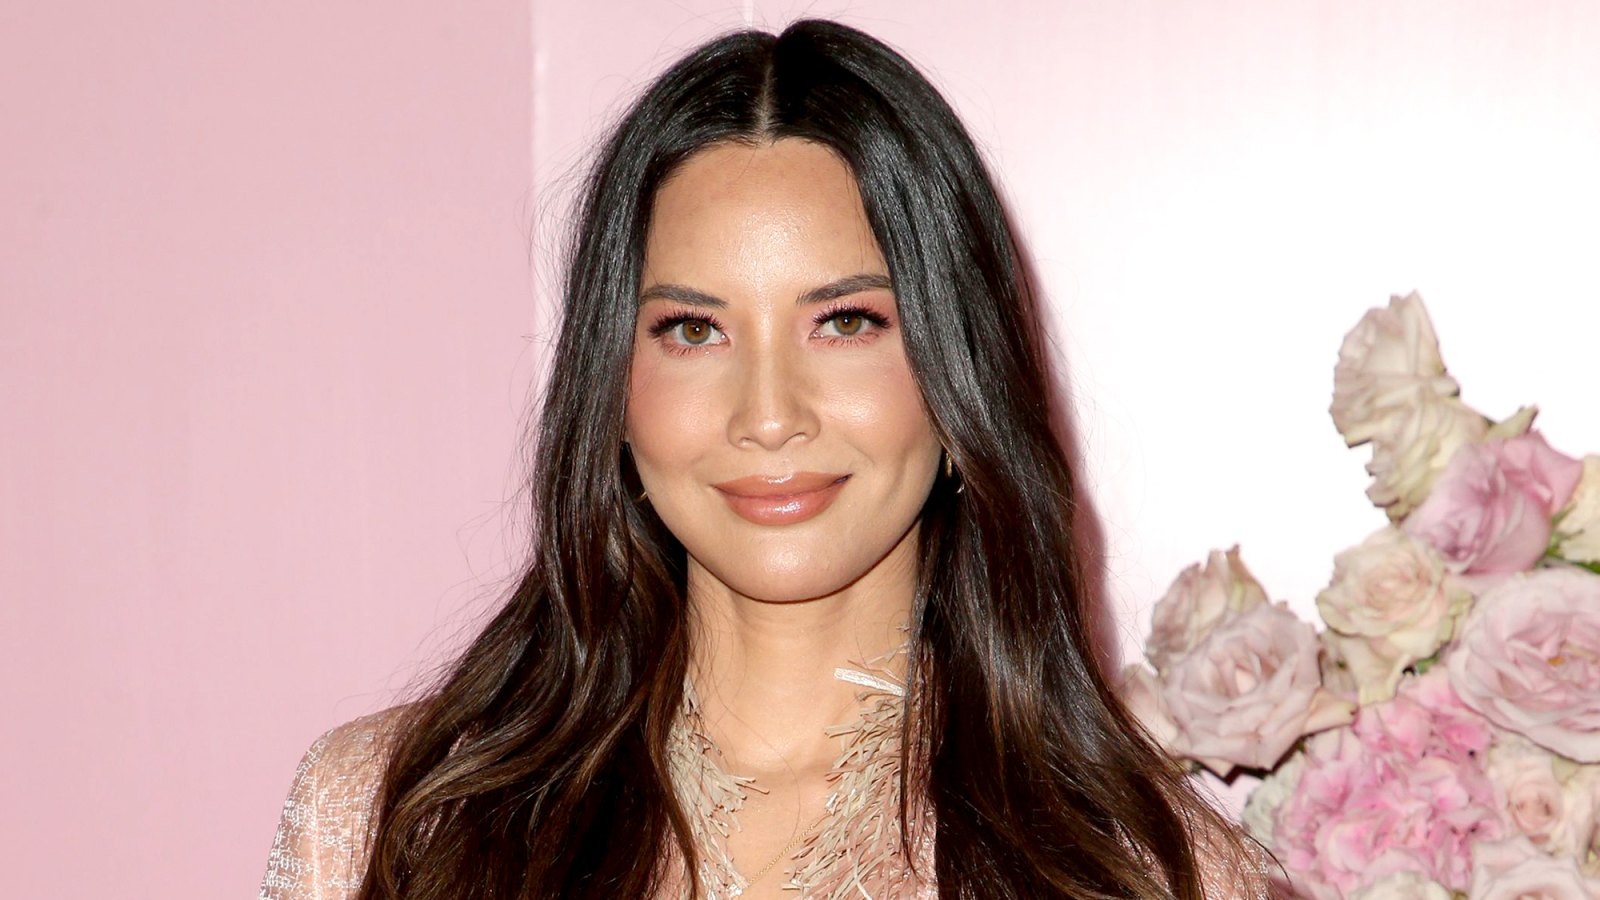 Olivia Munn Recalls Dating a Conspiracy Theorist for Several Years 1